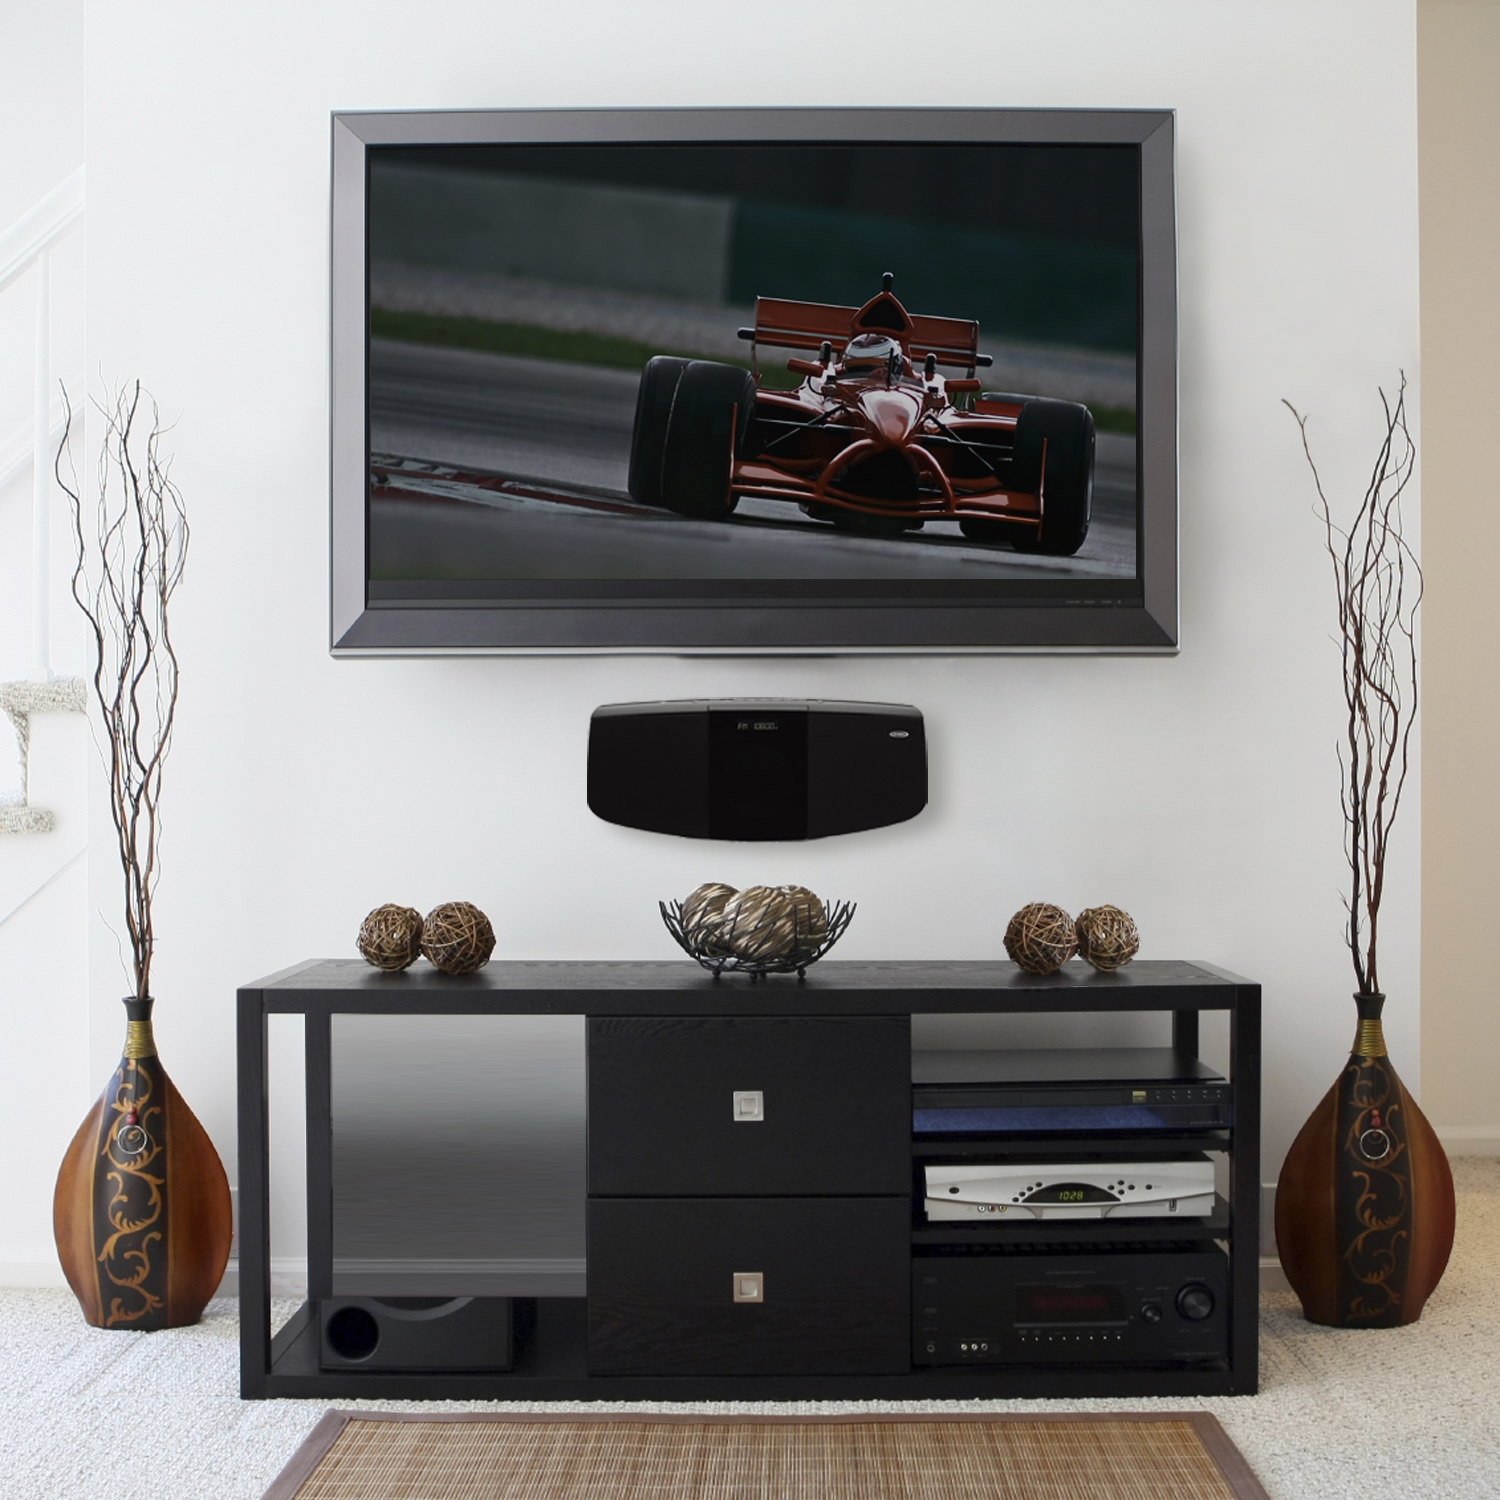 Jensen JBS-350 Bluetooth Wall-Mountable Music System with CD Player - image 3 of 3